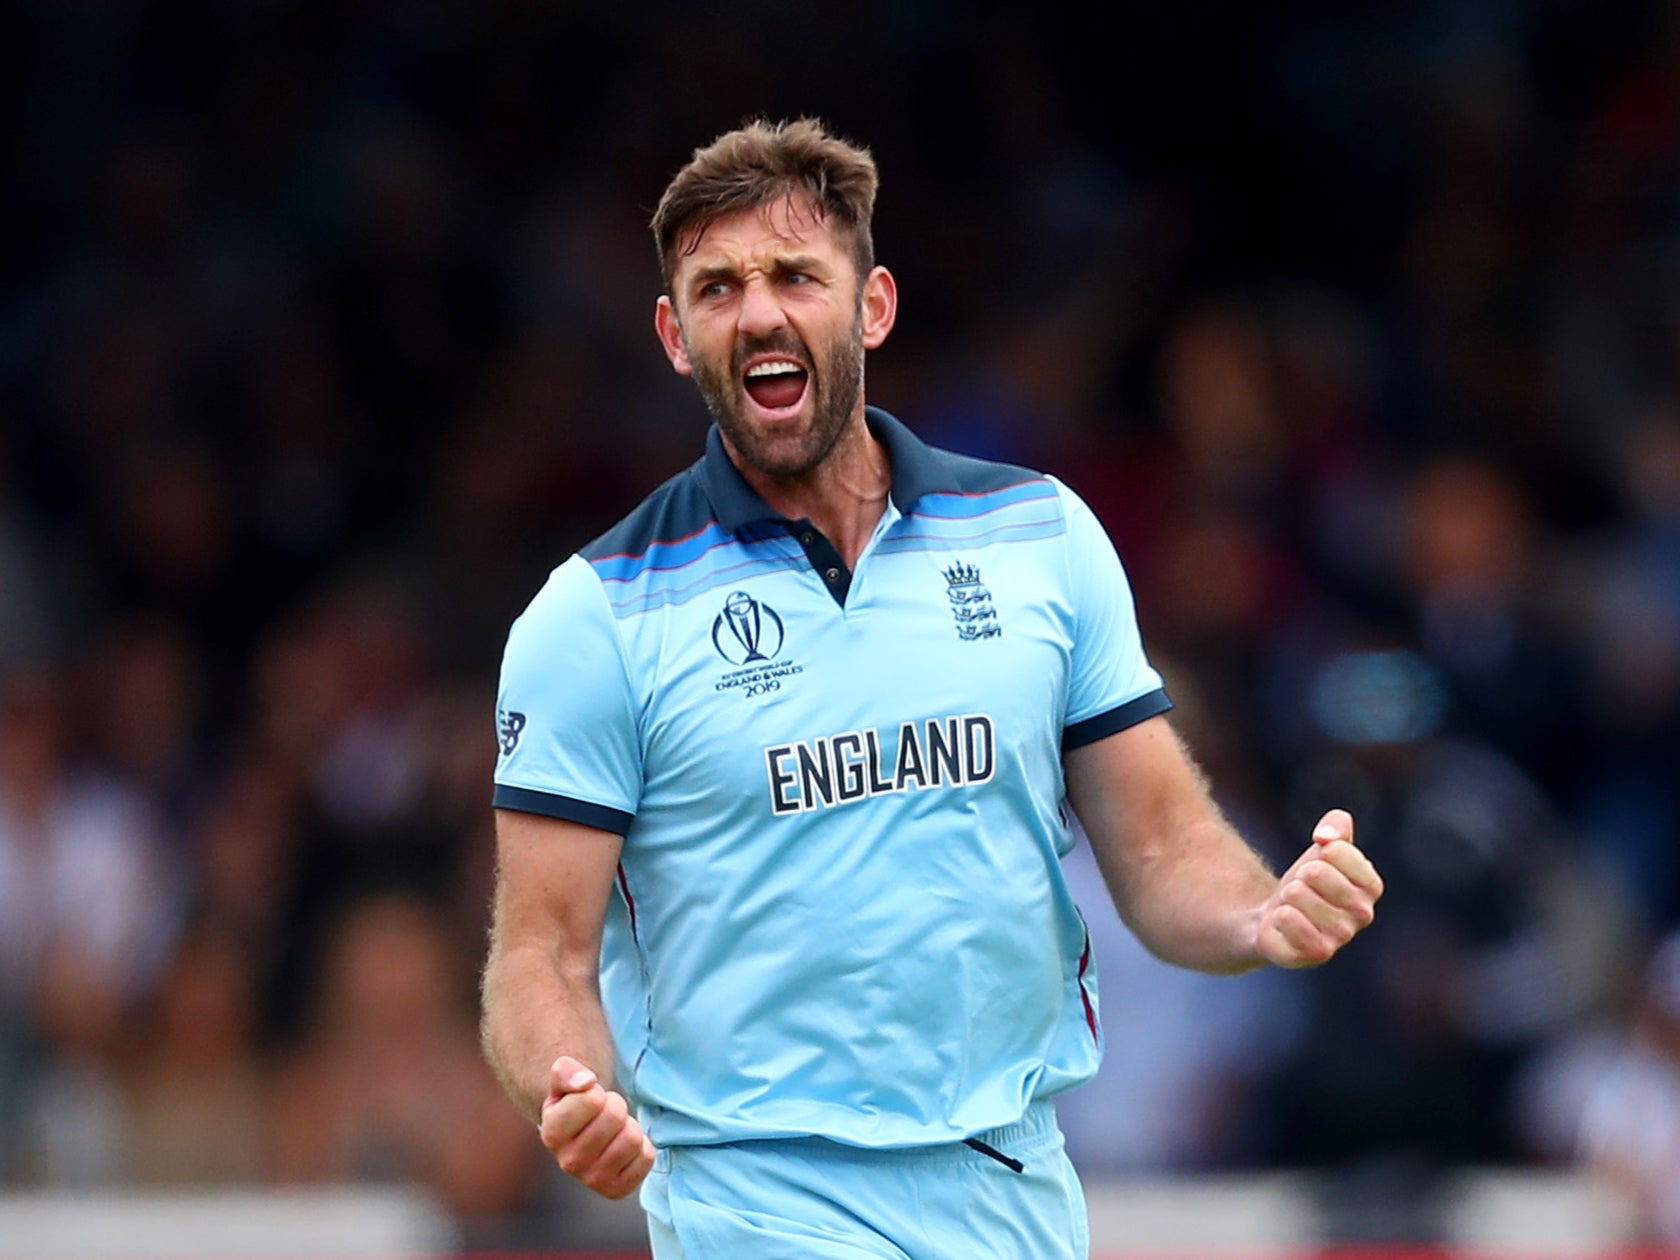 Liam Plunkett is set to leave England for the USA